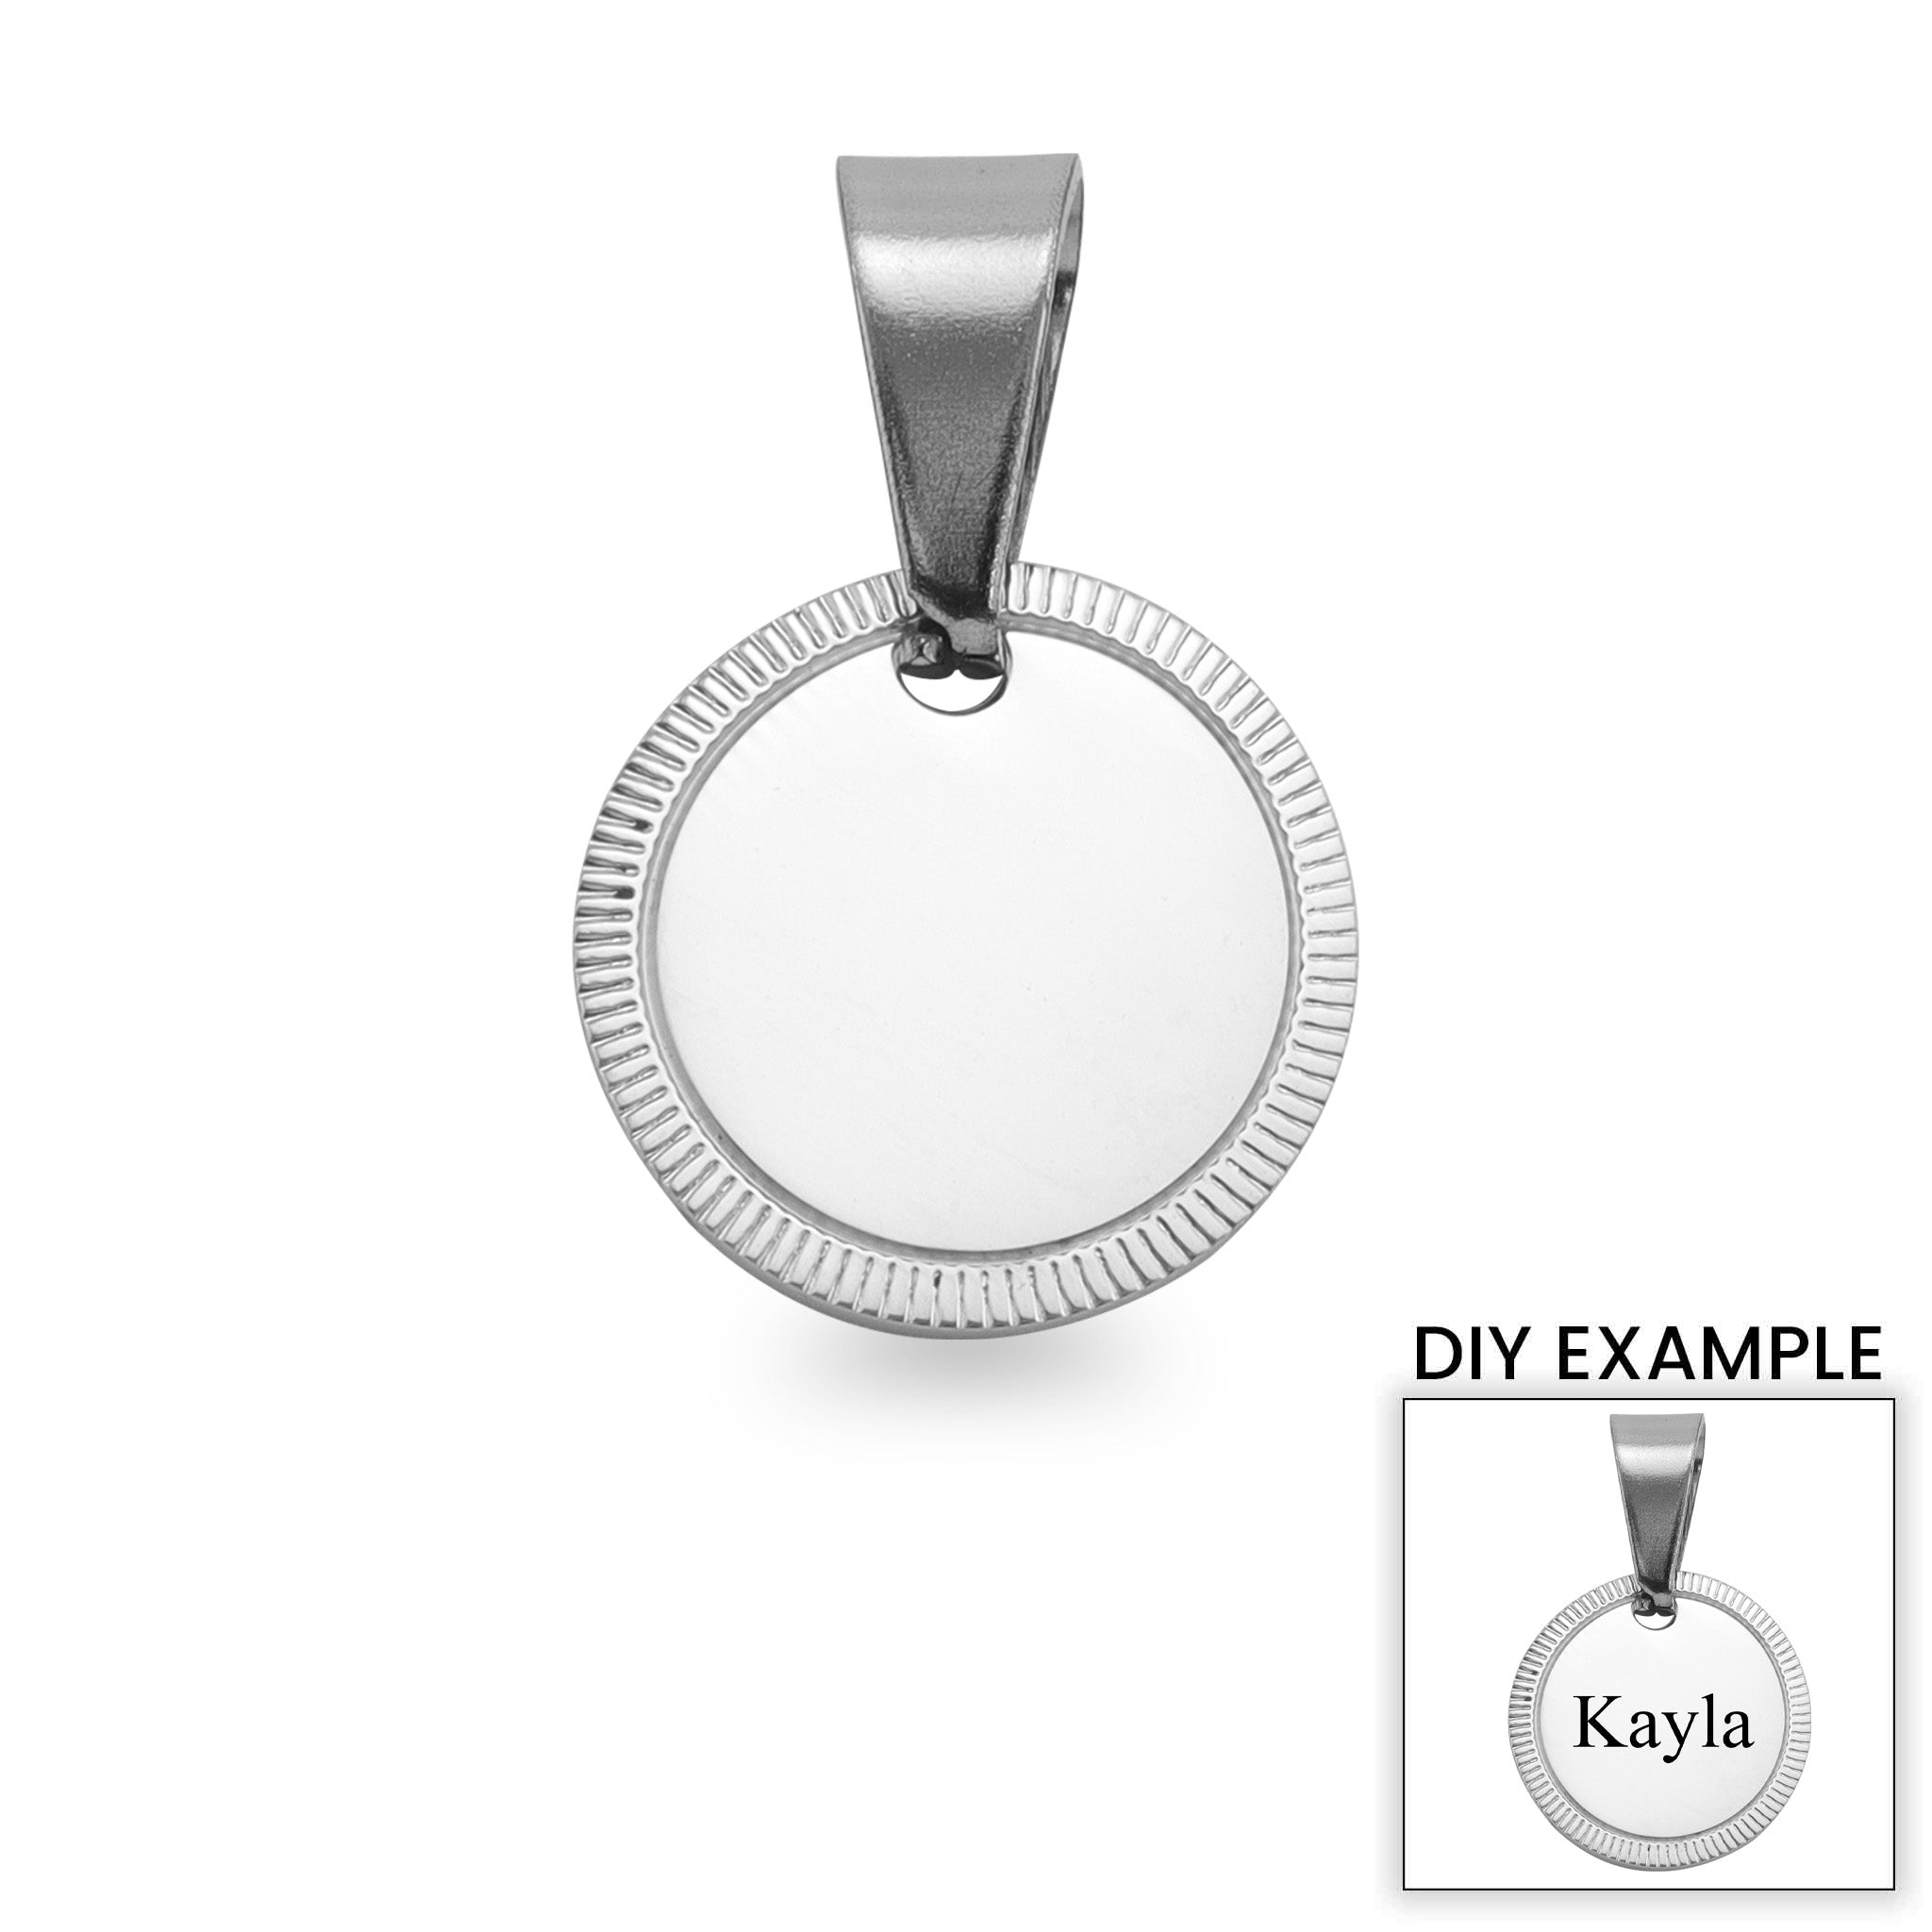 Detailed Stainless Steel Round Pendant / SBB0050